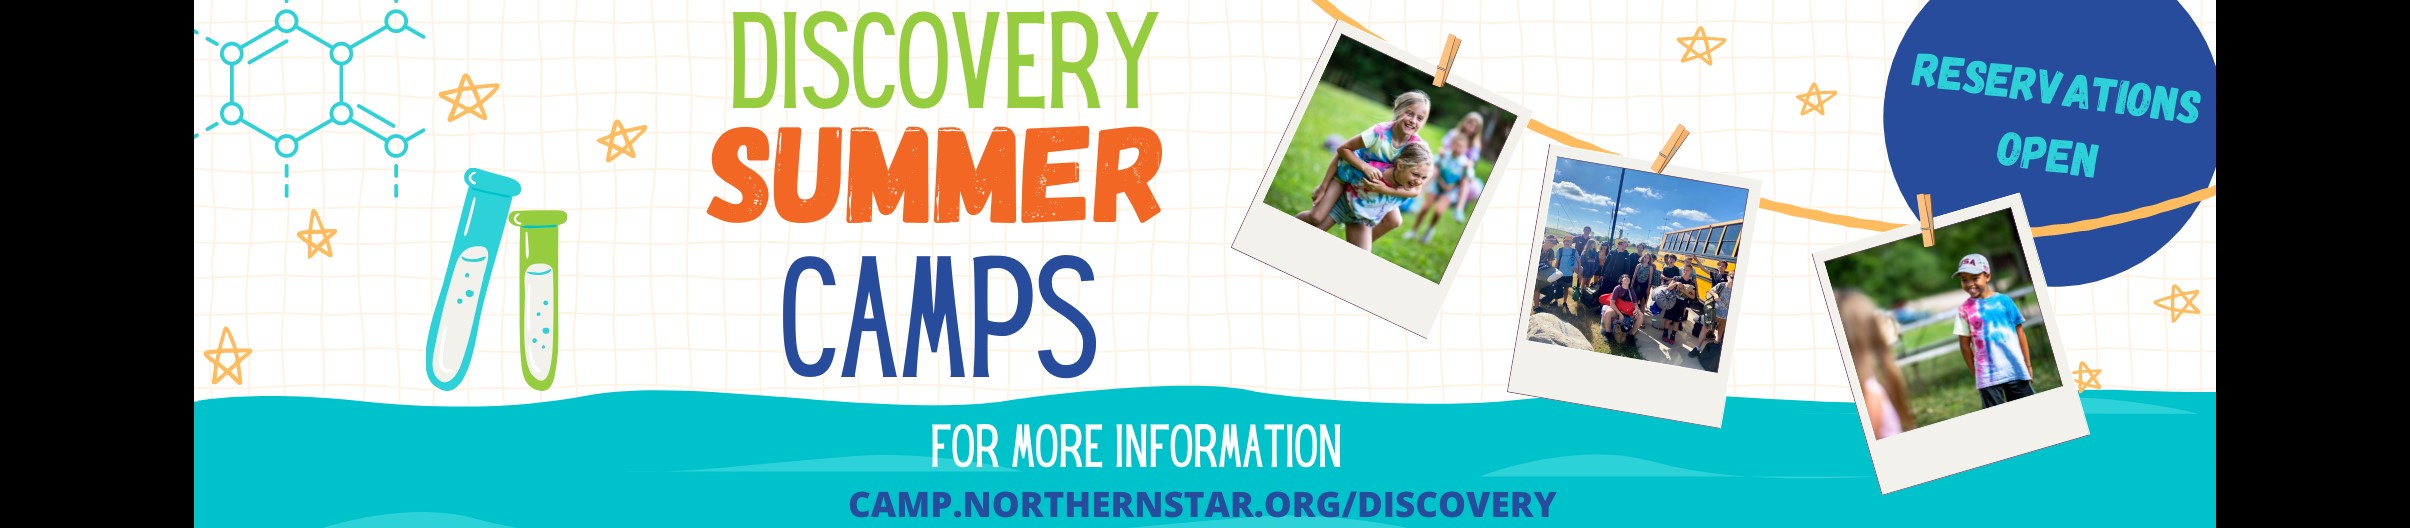 Discovery Summer Camps: Reservations open now. For more information, head to camp.northernstar.org/discovery